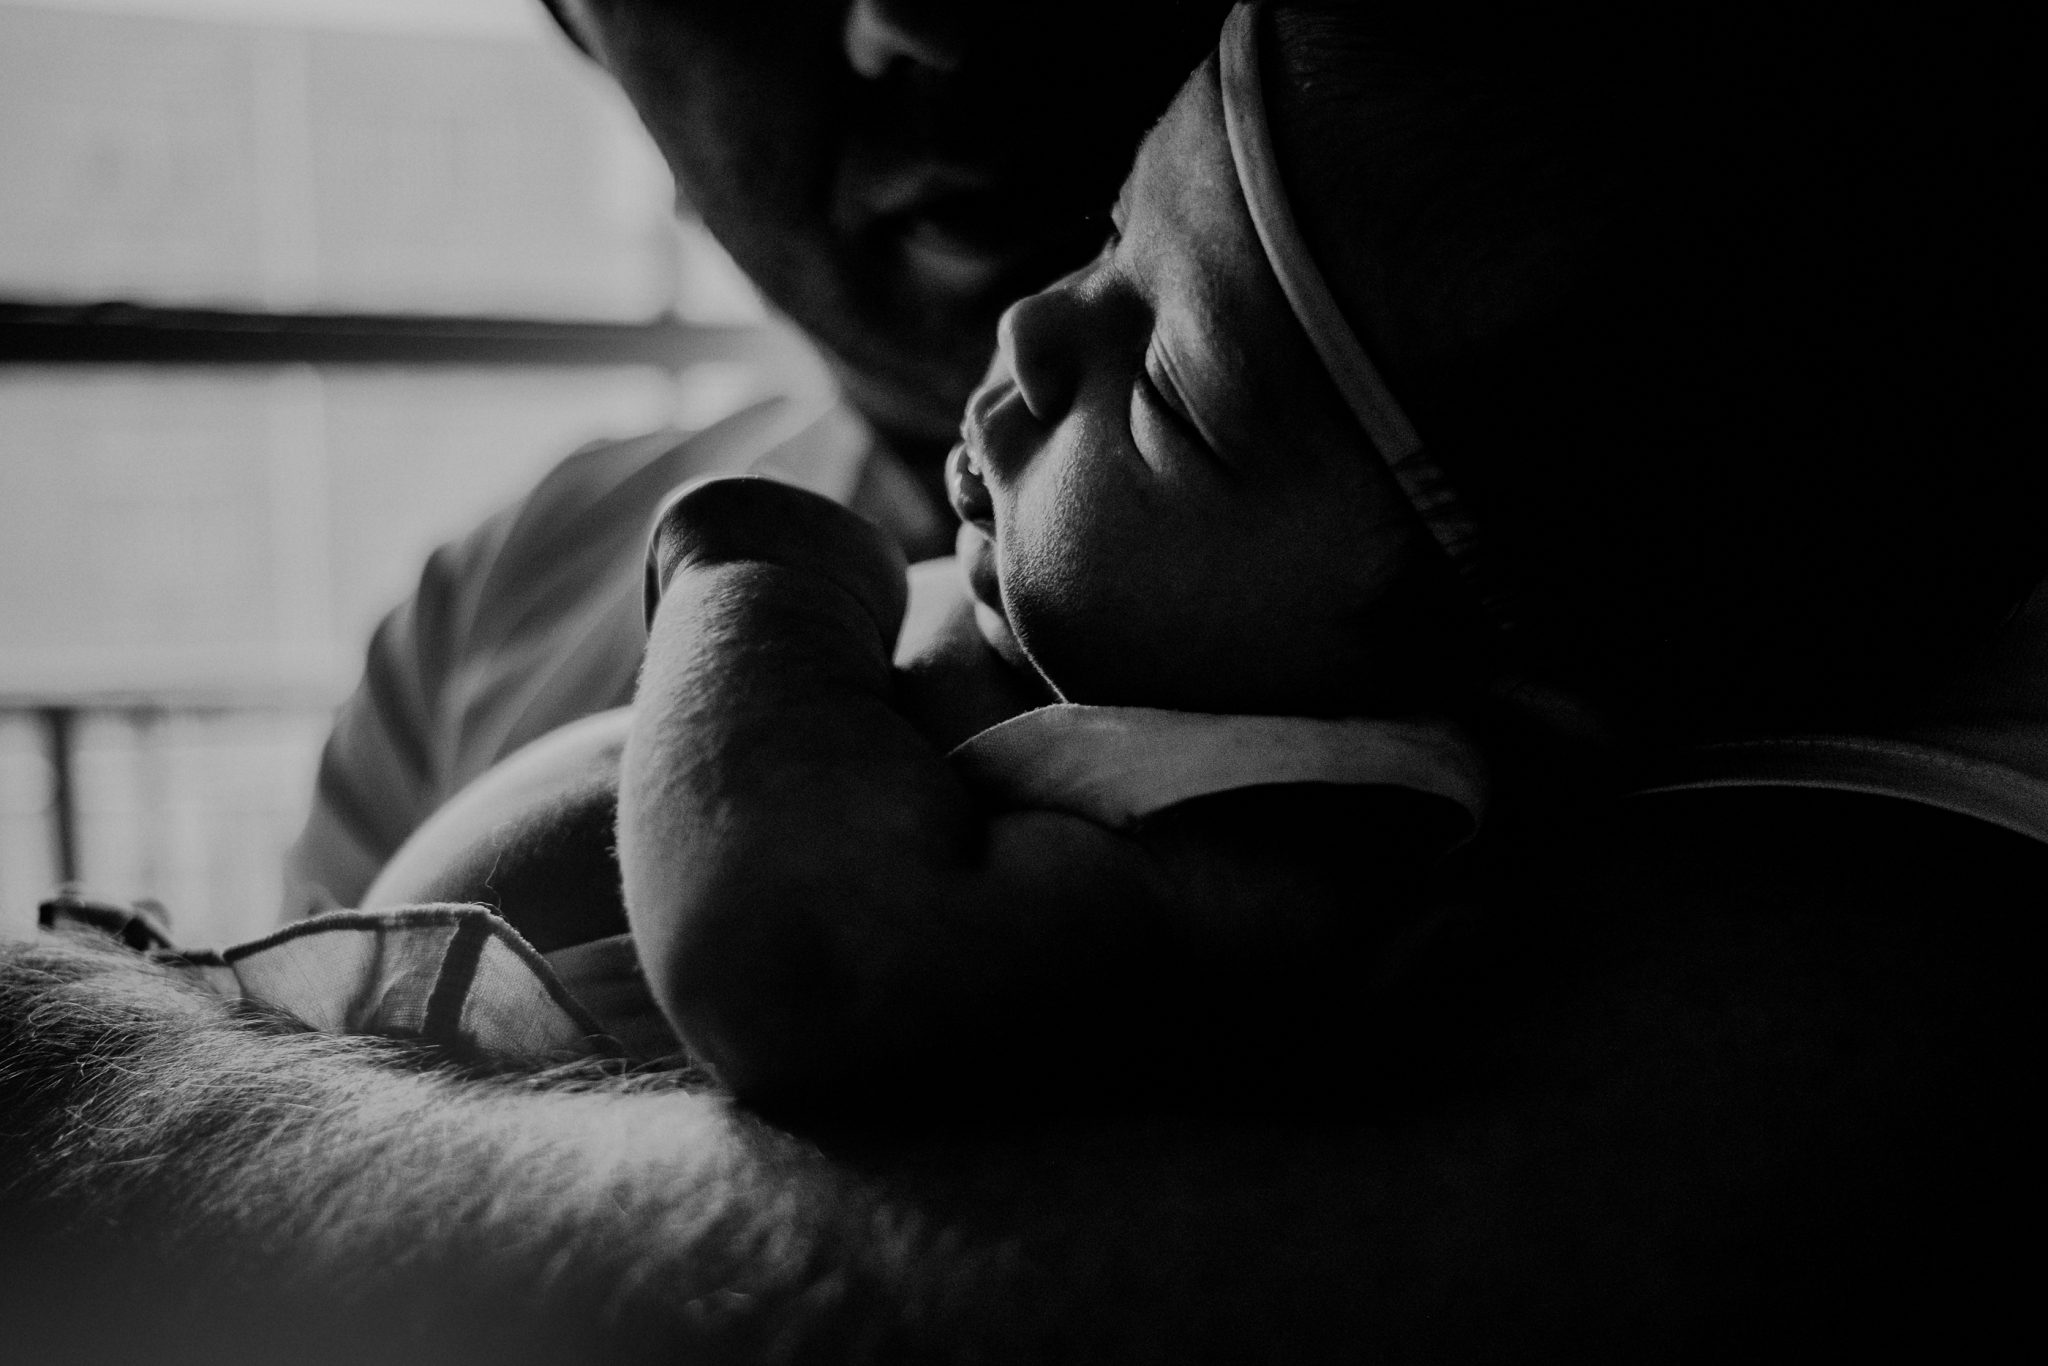 father's arm in foreground of black and white image holding baby